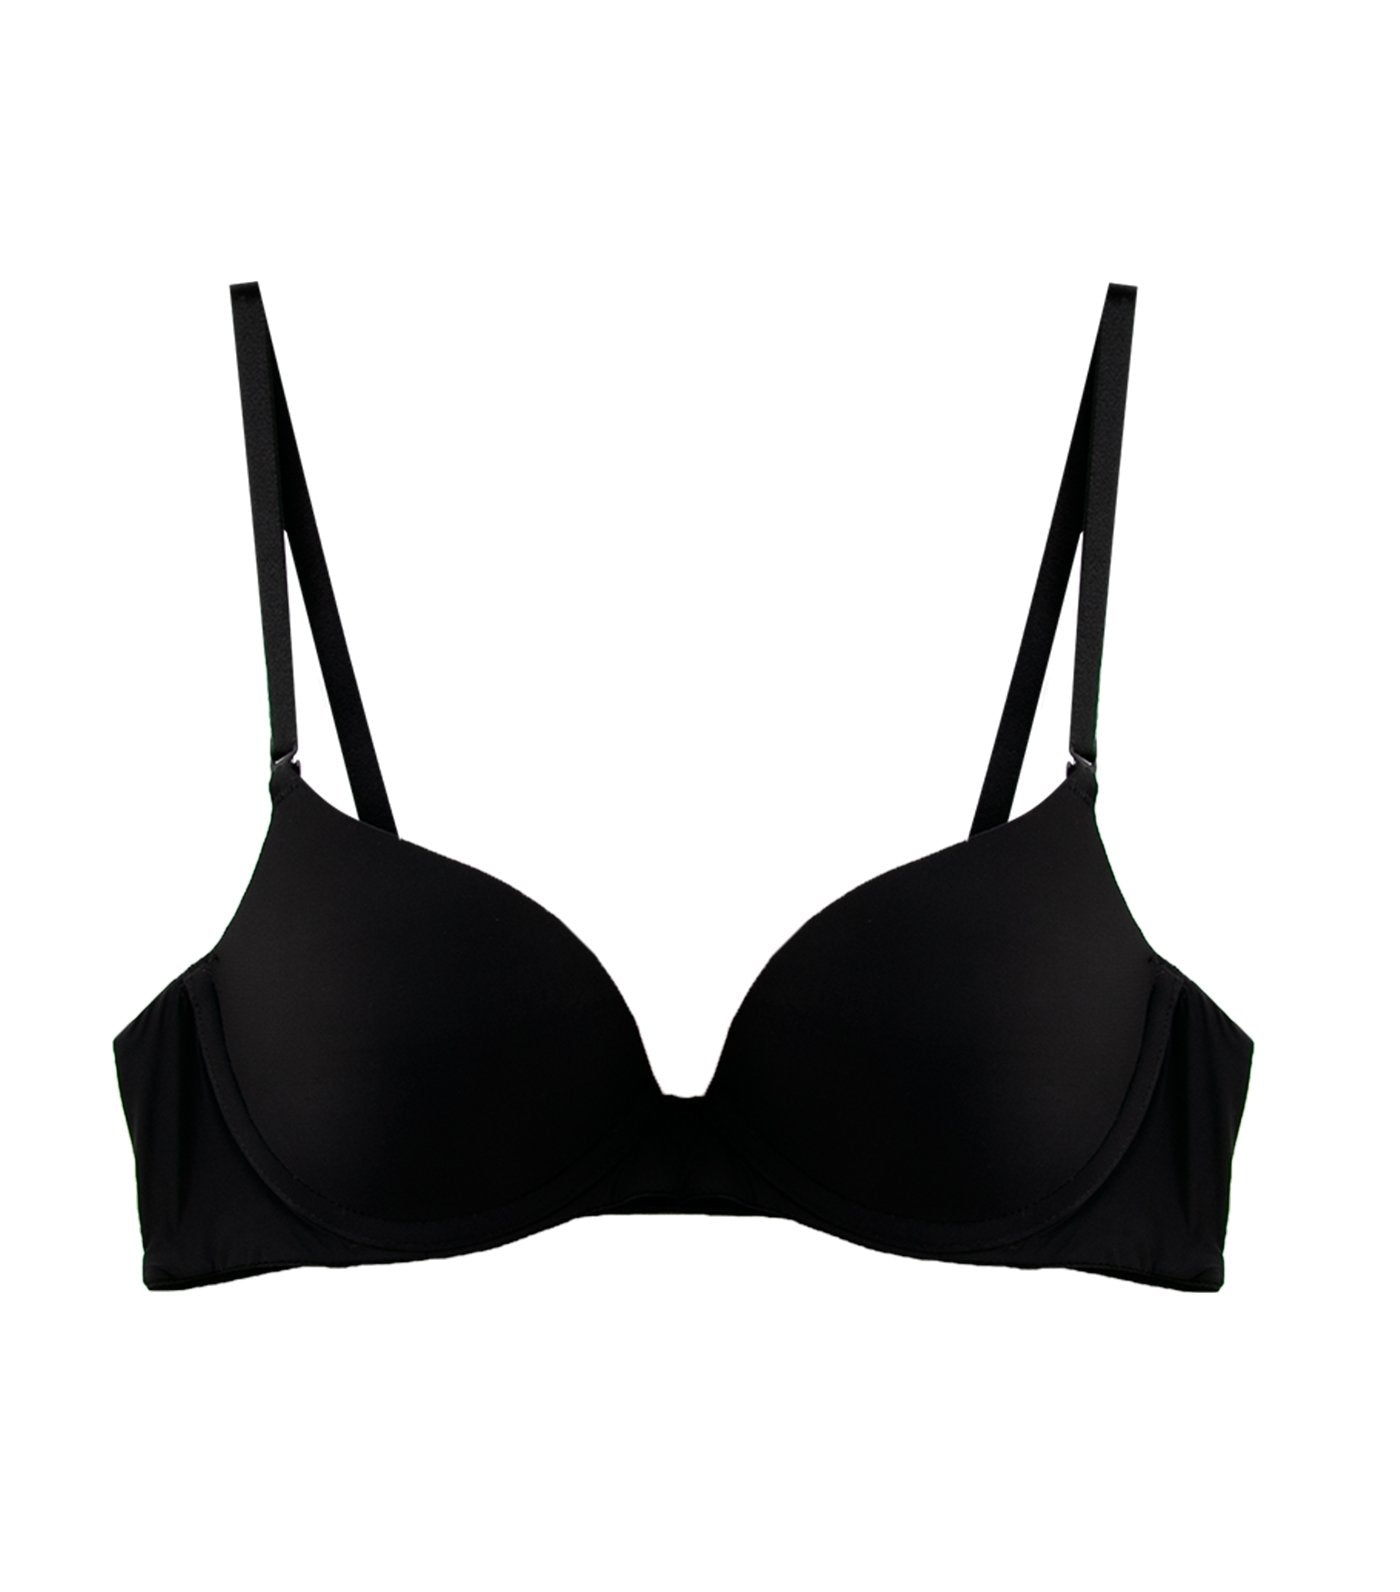 What is a Maximizer Bra? - WOO